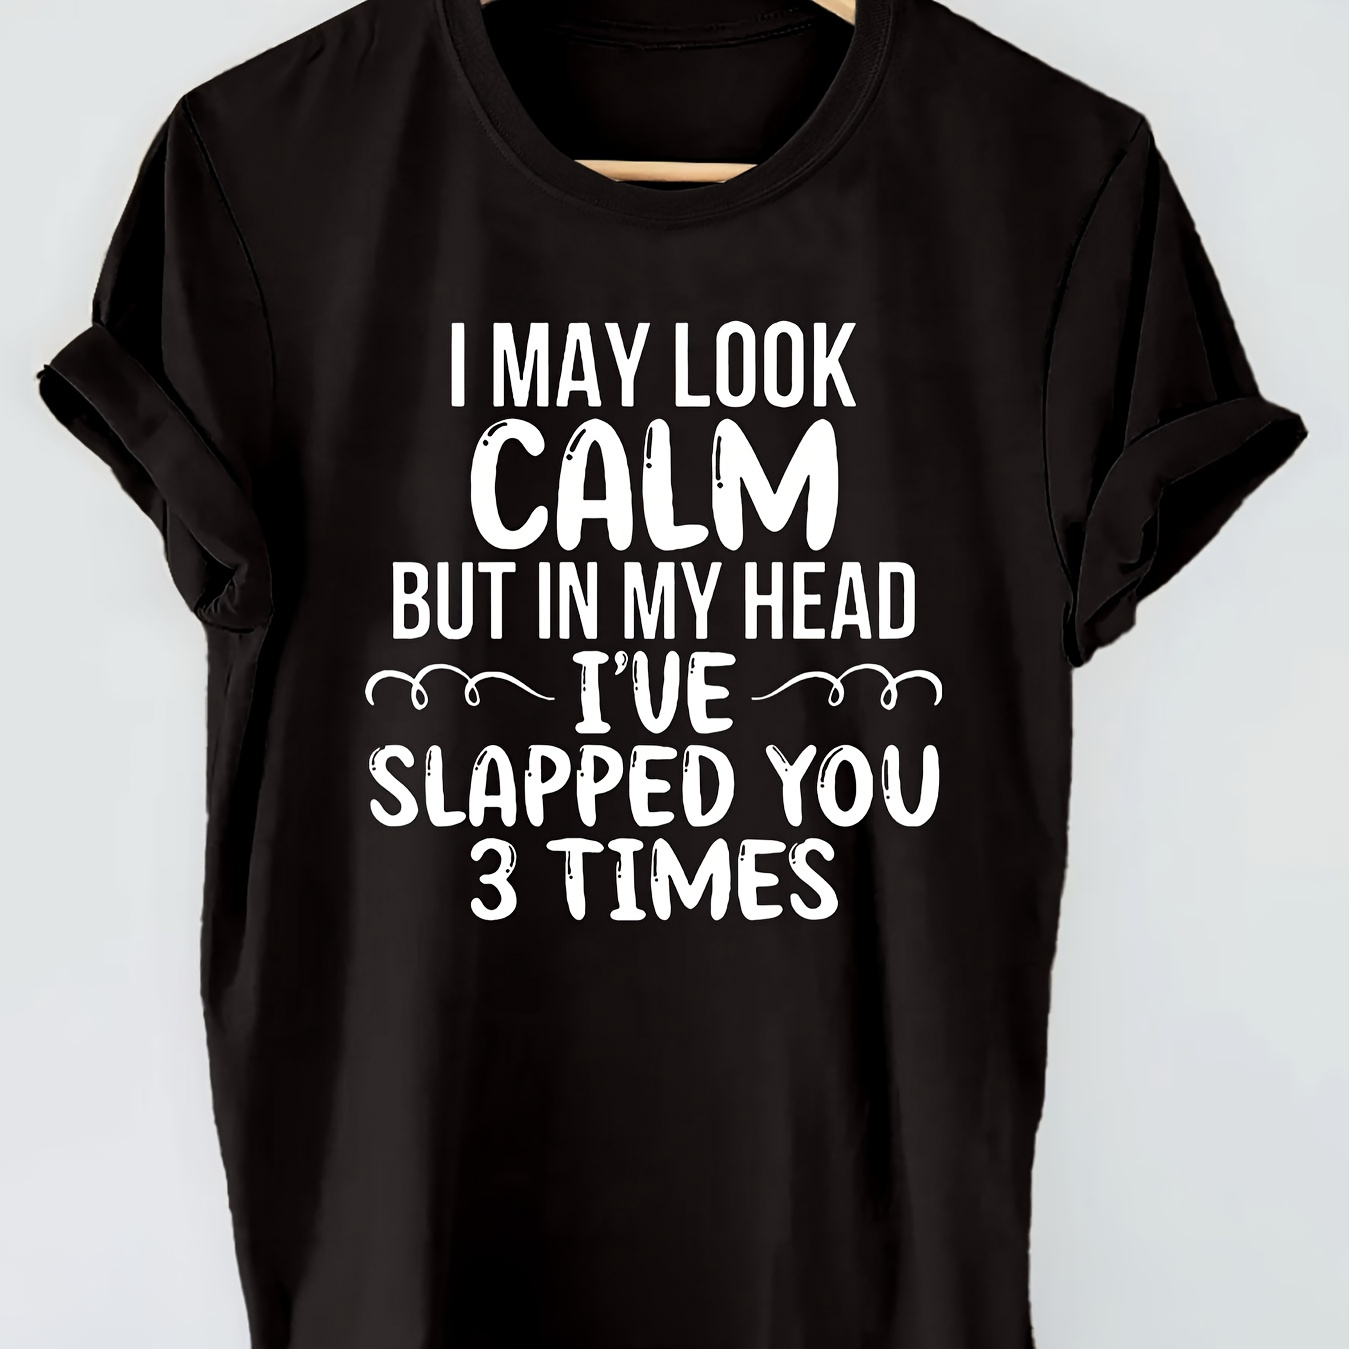 

I May Look Calm Print T-shirt, Short Sleeve Crew Neck Casual Top For Summer & Spring, Women's Clothing